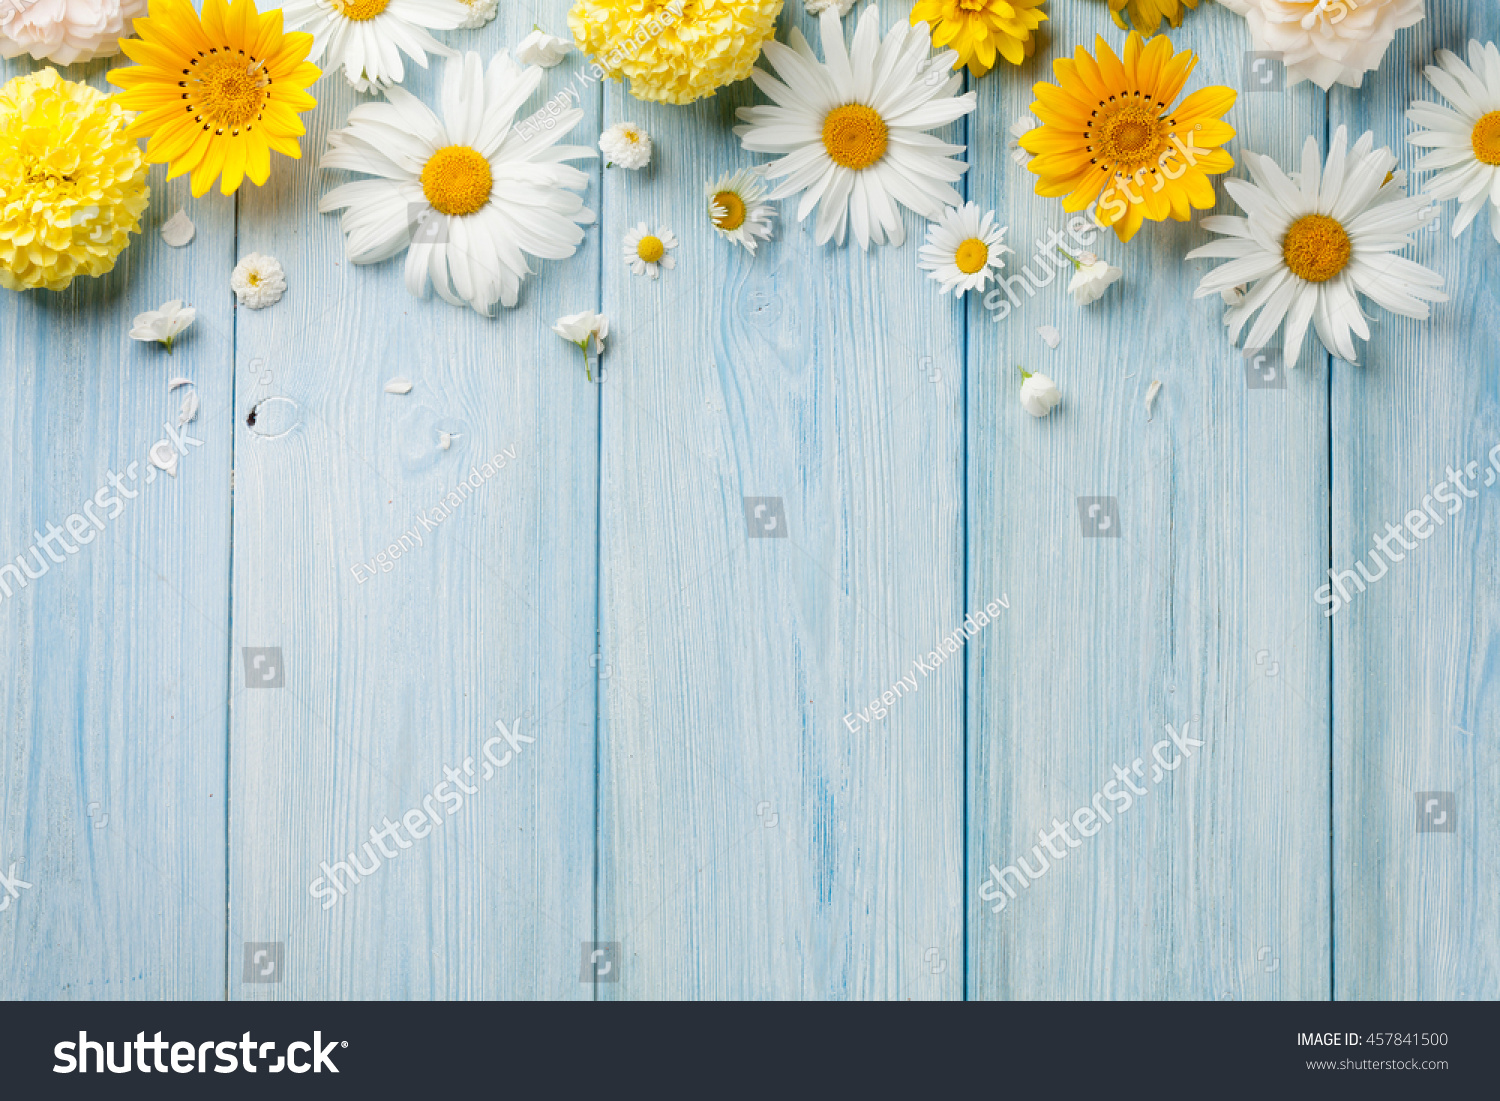 Garden flowers over blue wooden table background. Backdrop with copy space #457841500